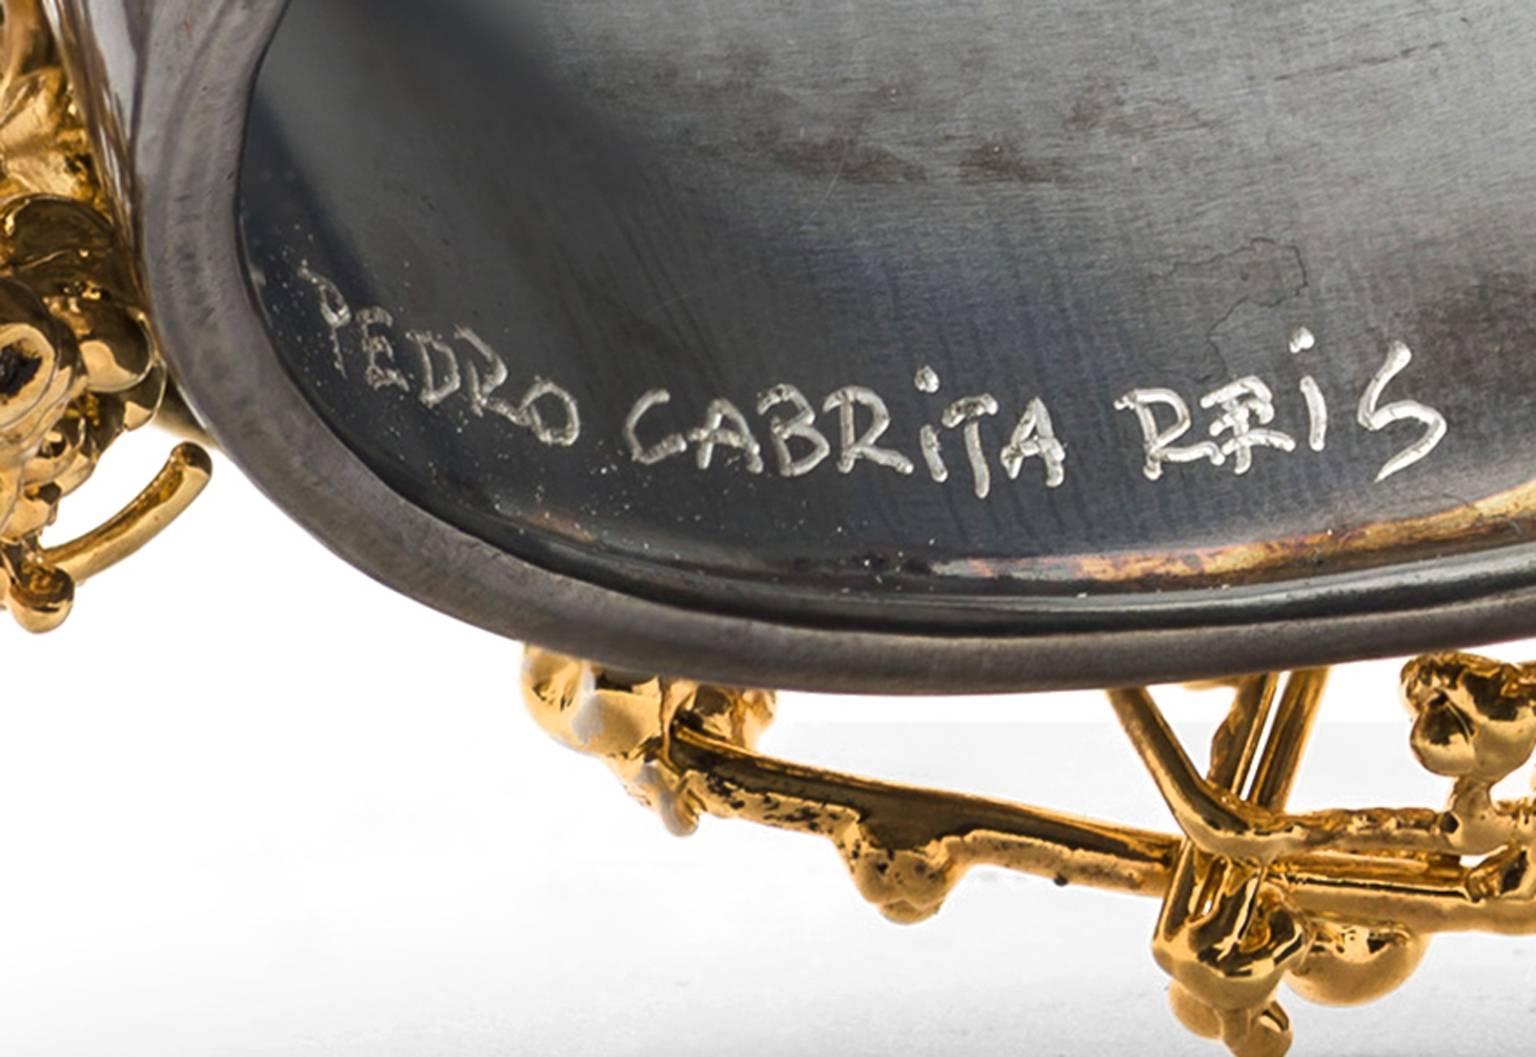 Unique handmade gold plated iron with oxidised silver bangle.

B by Pedro Cabrita Reis is a collection of unique wearable sculptures created by the artist as part of a project conceived for Elisabetta Cipriani gallery.

“There is no difference